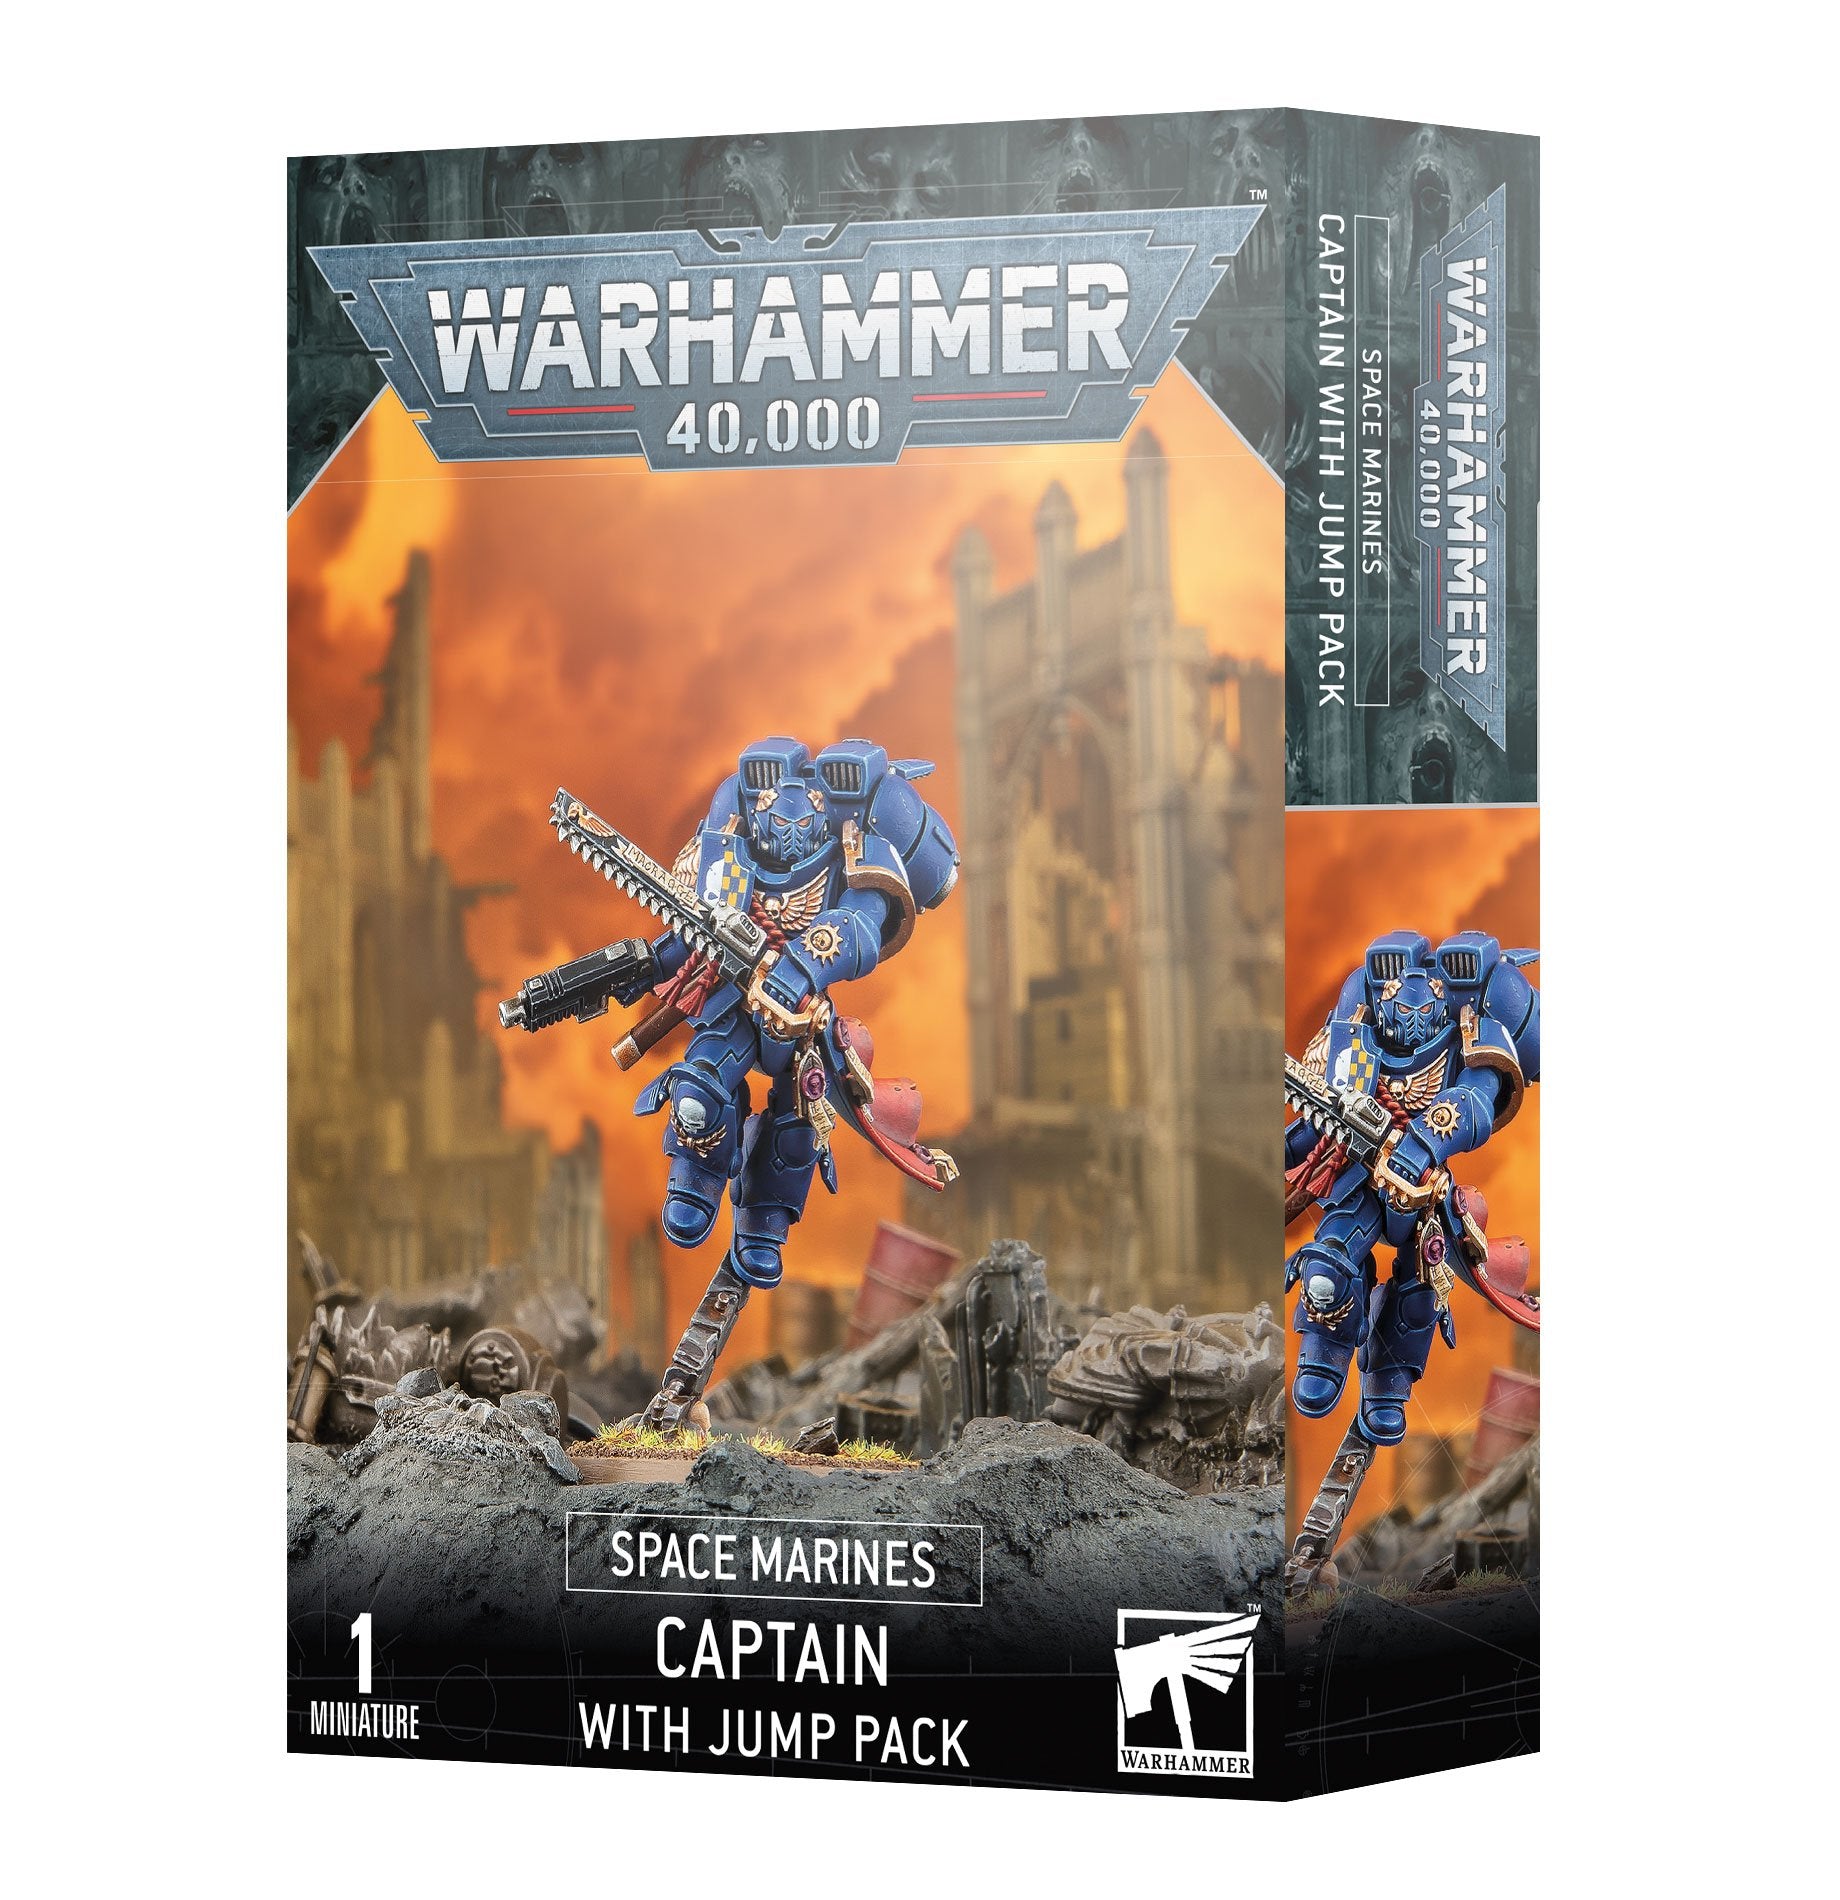 WH40K SPACE MARINES: CAPTAIN WITH JUMP PACK | Impulse Games and Hobbies